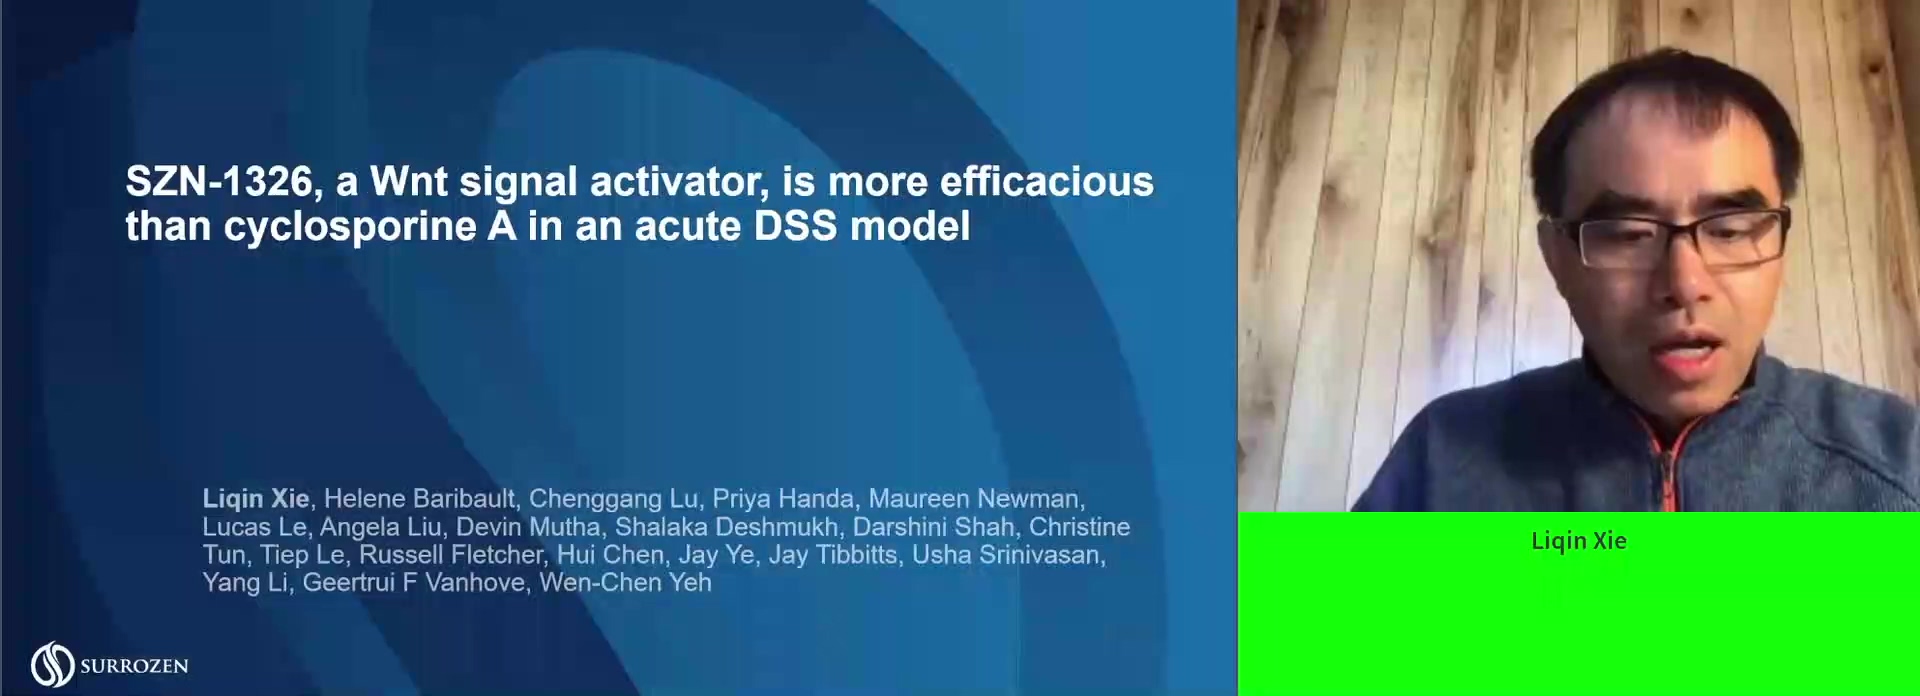 SZN-1326, A WNT SIGNAL ACTIVATOR, IS MORE EFFICACIOUS THAN CYCLOSPORINE A IN AN ACUTE DSS MODEL